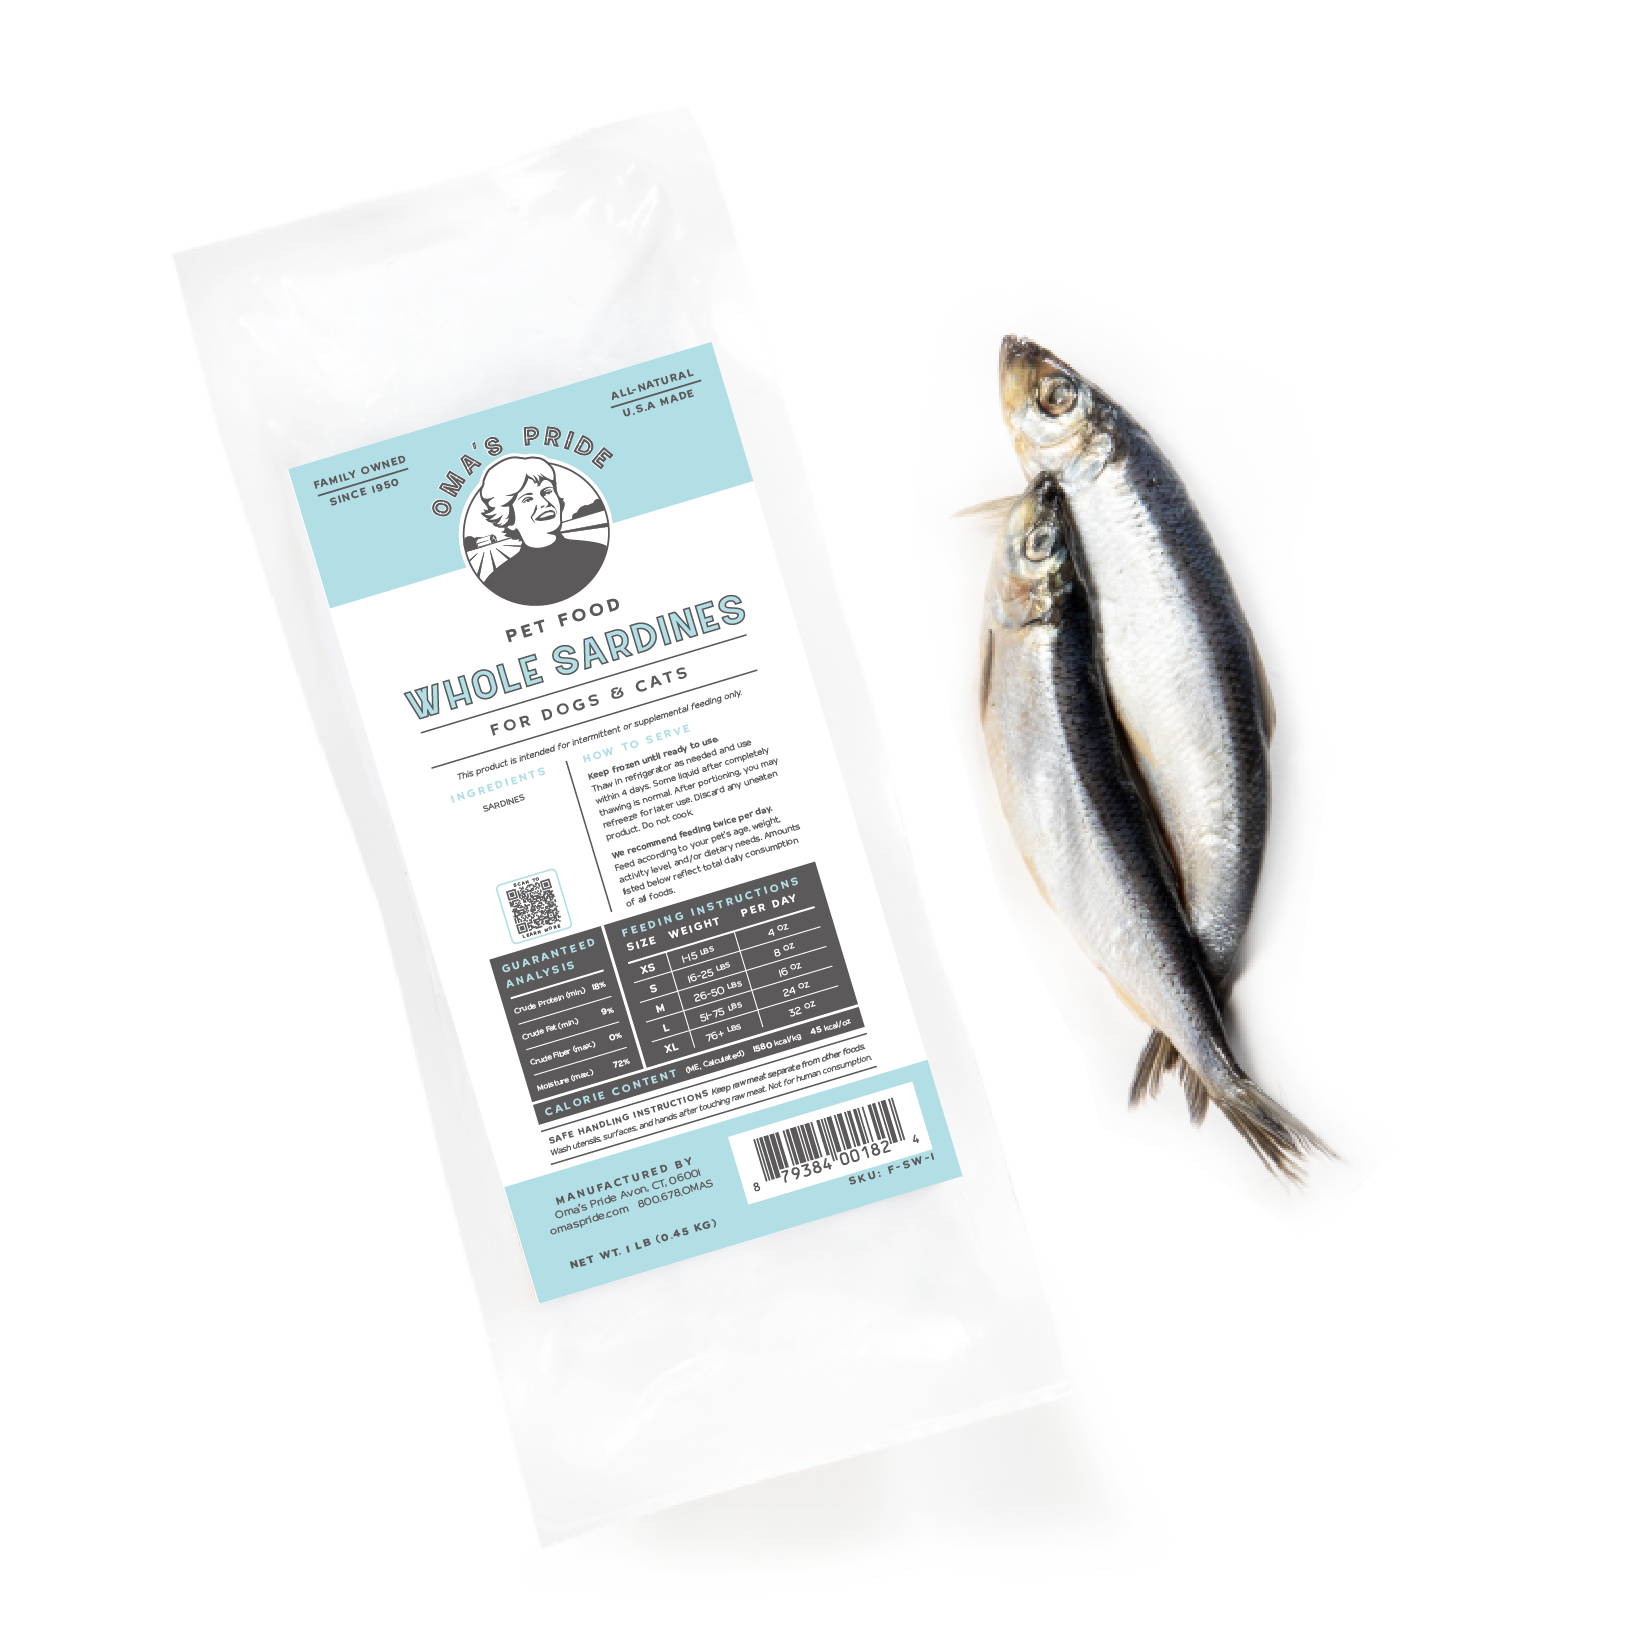 Oma's Pride whole raw sardines product packaging with two fish.